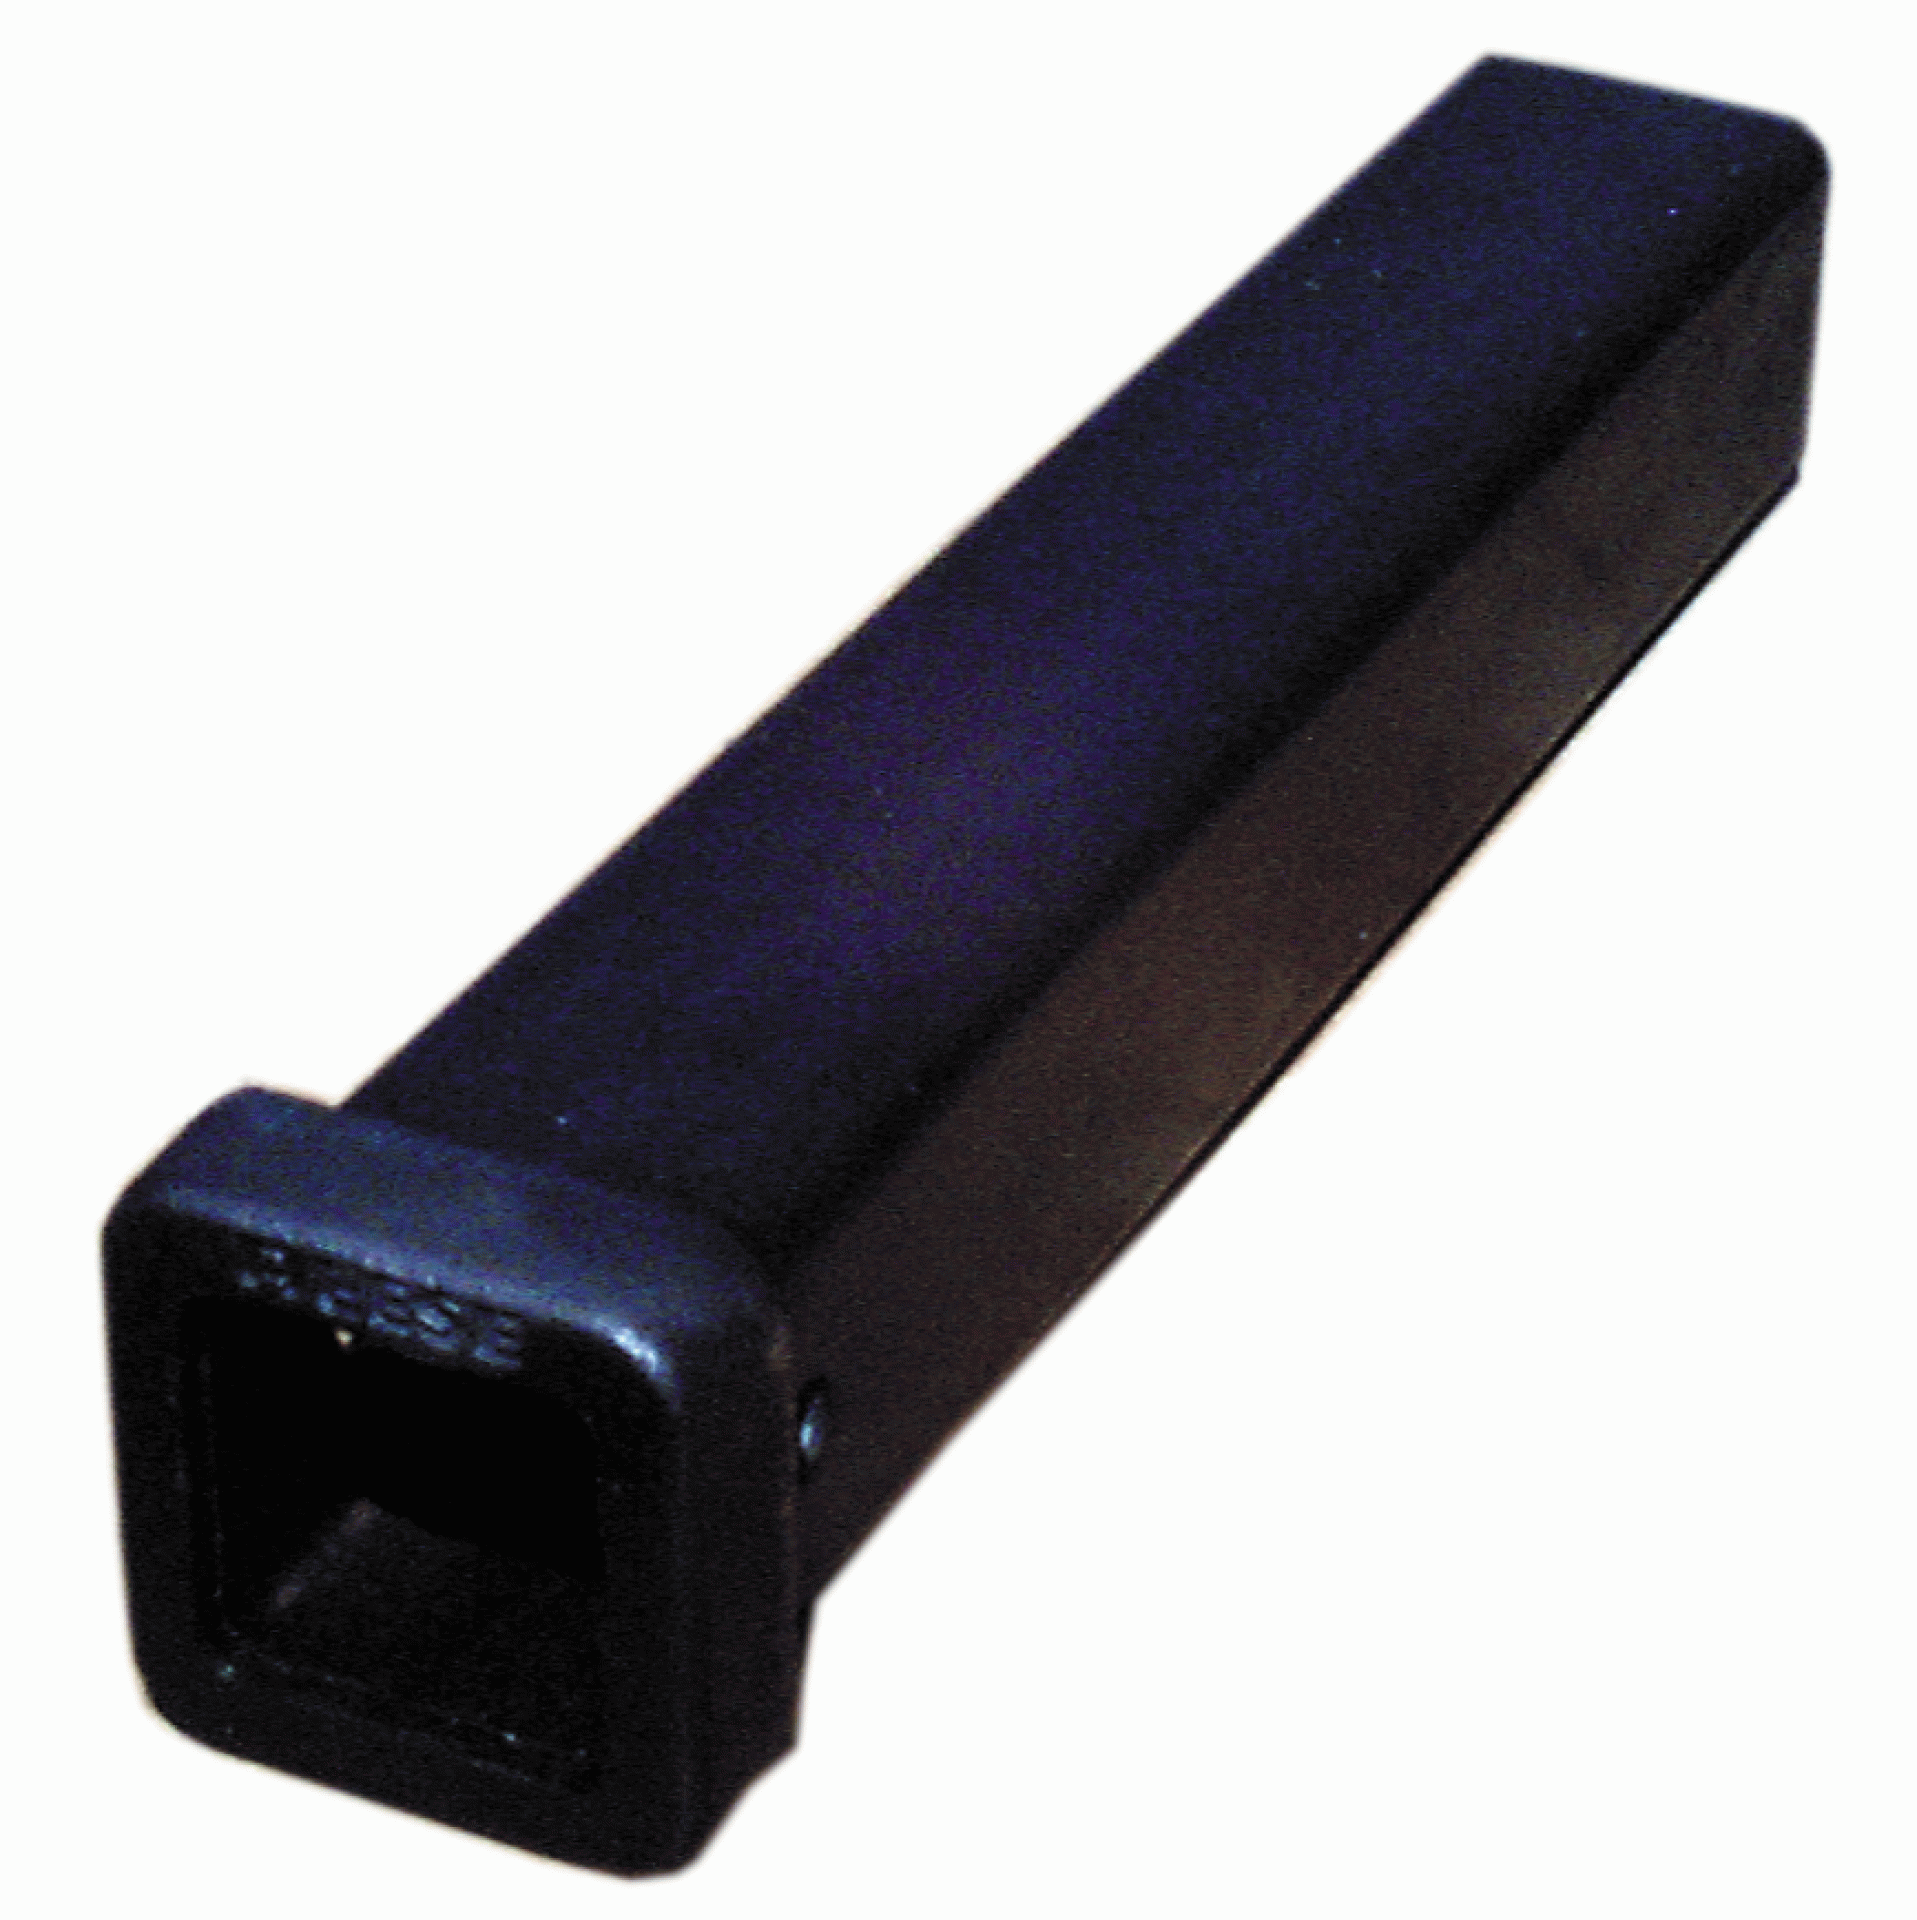 REESE | 11029 | HITCH TUBE FOR 2-1/2" HITCH BARS 18" LONG